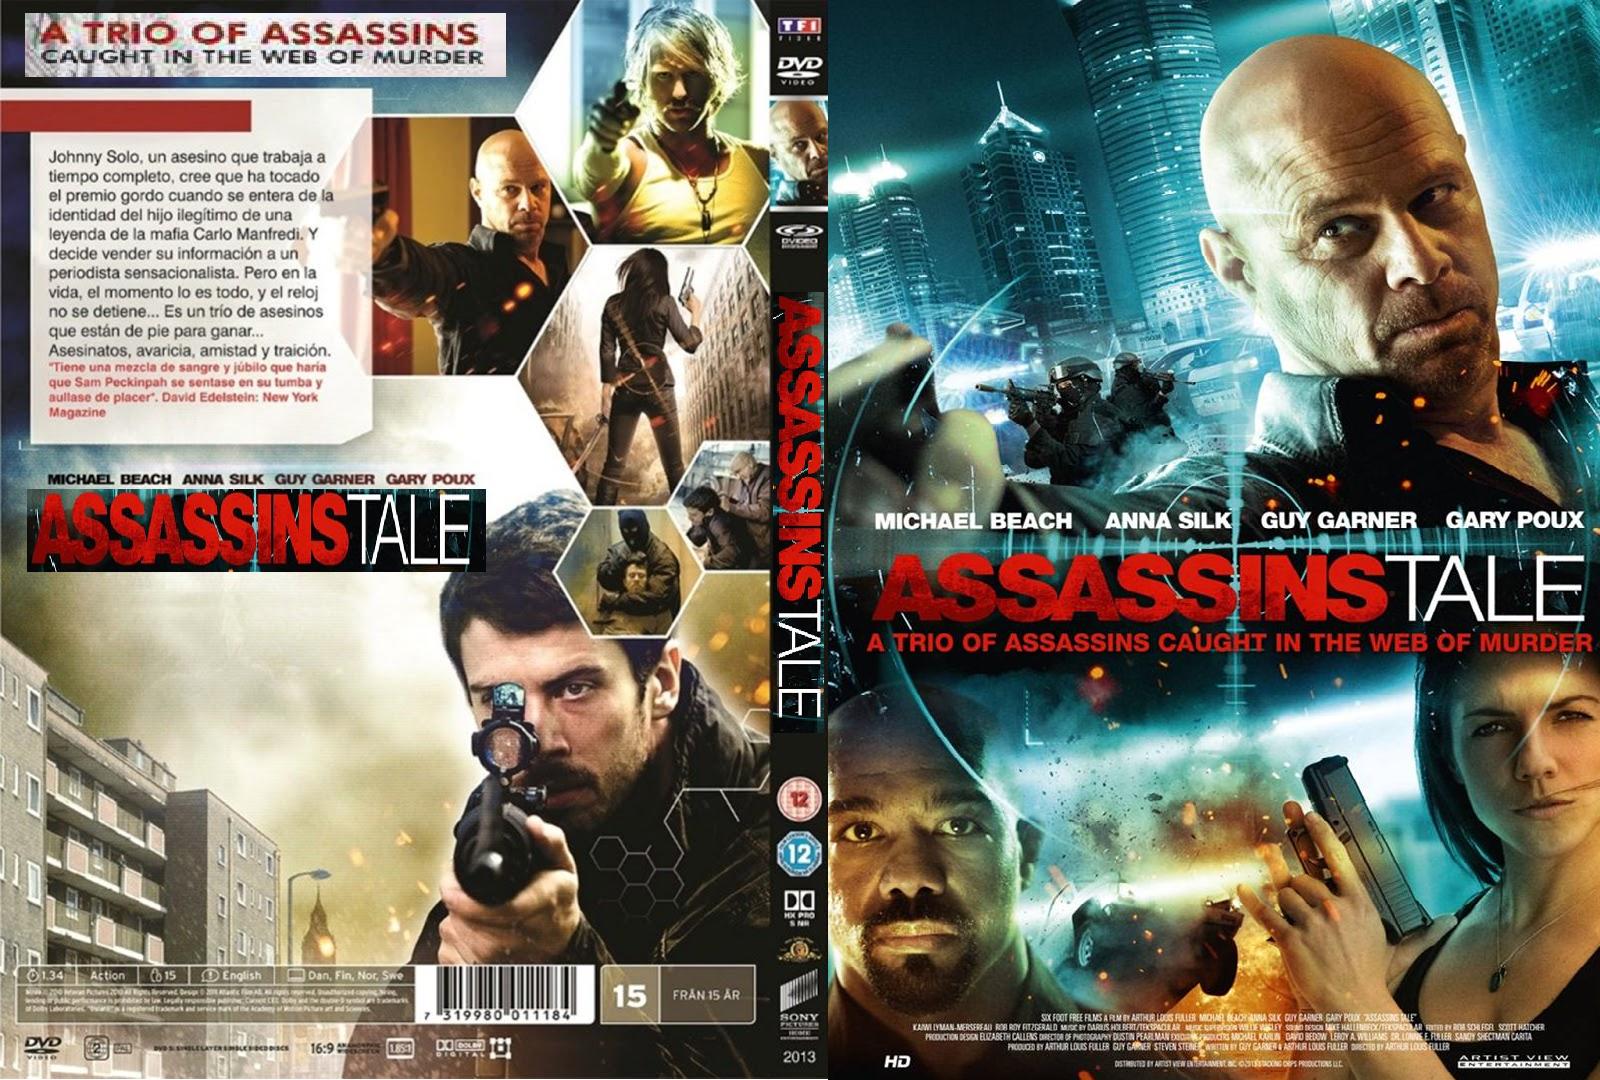 Covers Box Sk Assassins Tale 2013 High Quality Dvd Blueray Movie